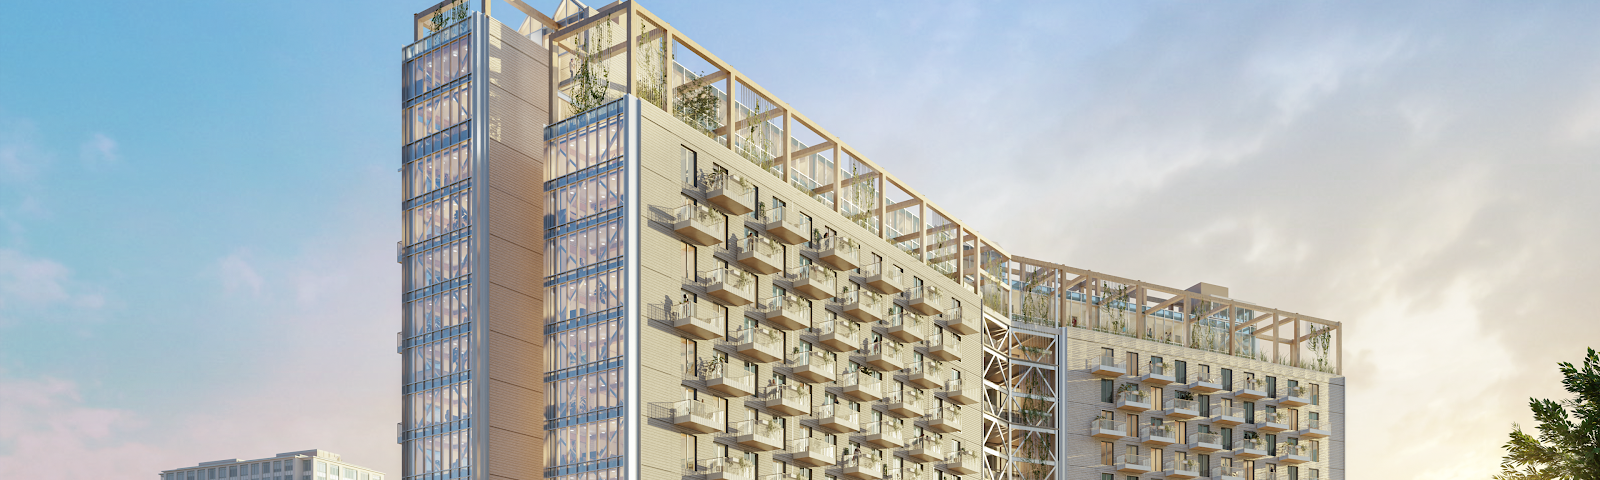 A rendering of a 15-story mass timber building model by Sidewalk Labs.